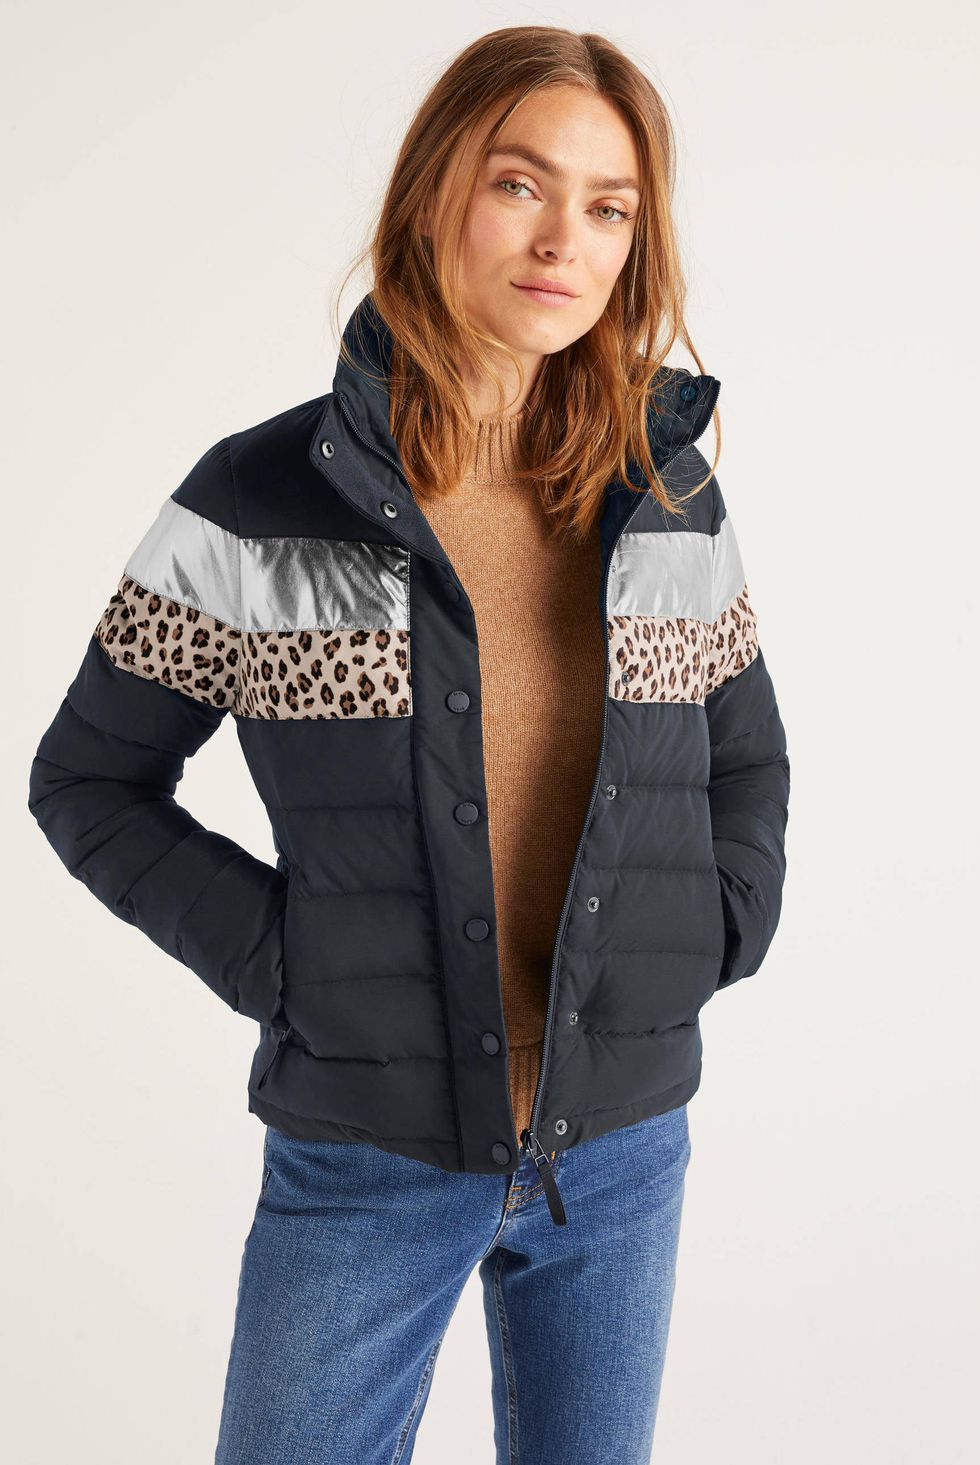 Boden puffer jacket - Boden's selling the perfect winter puffer coat